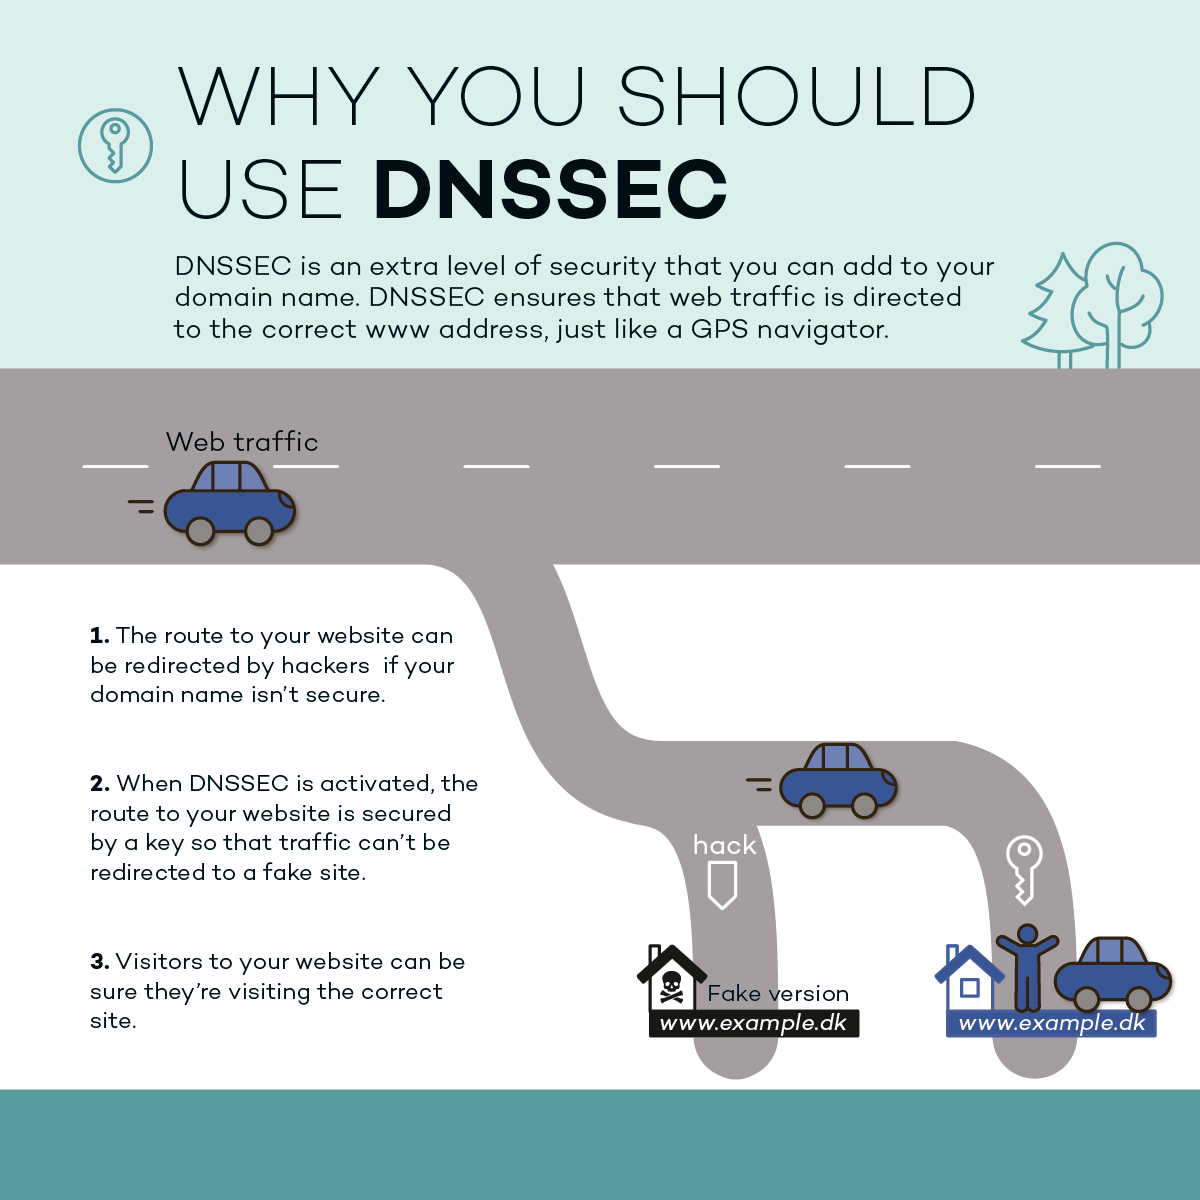 Why DNSSEC